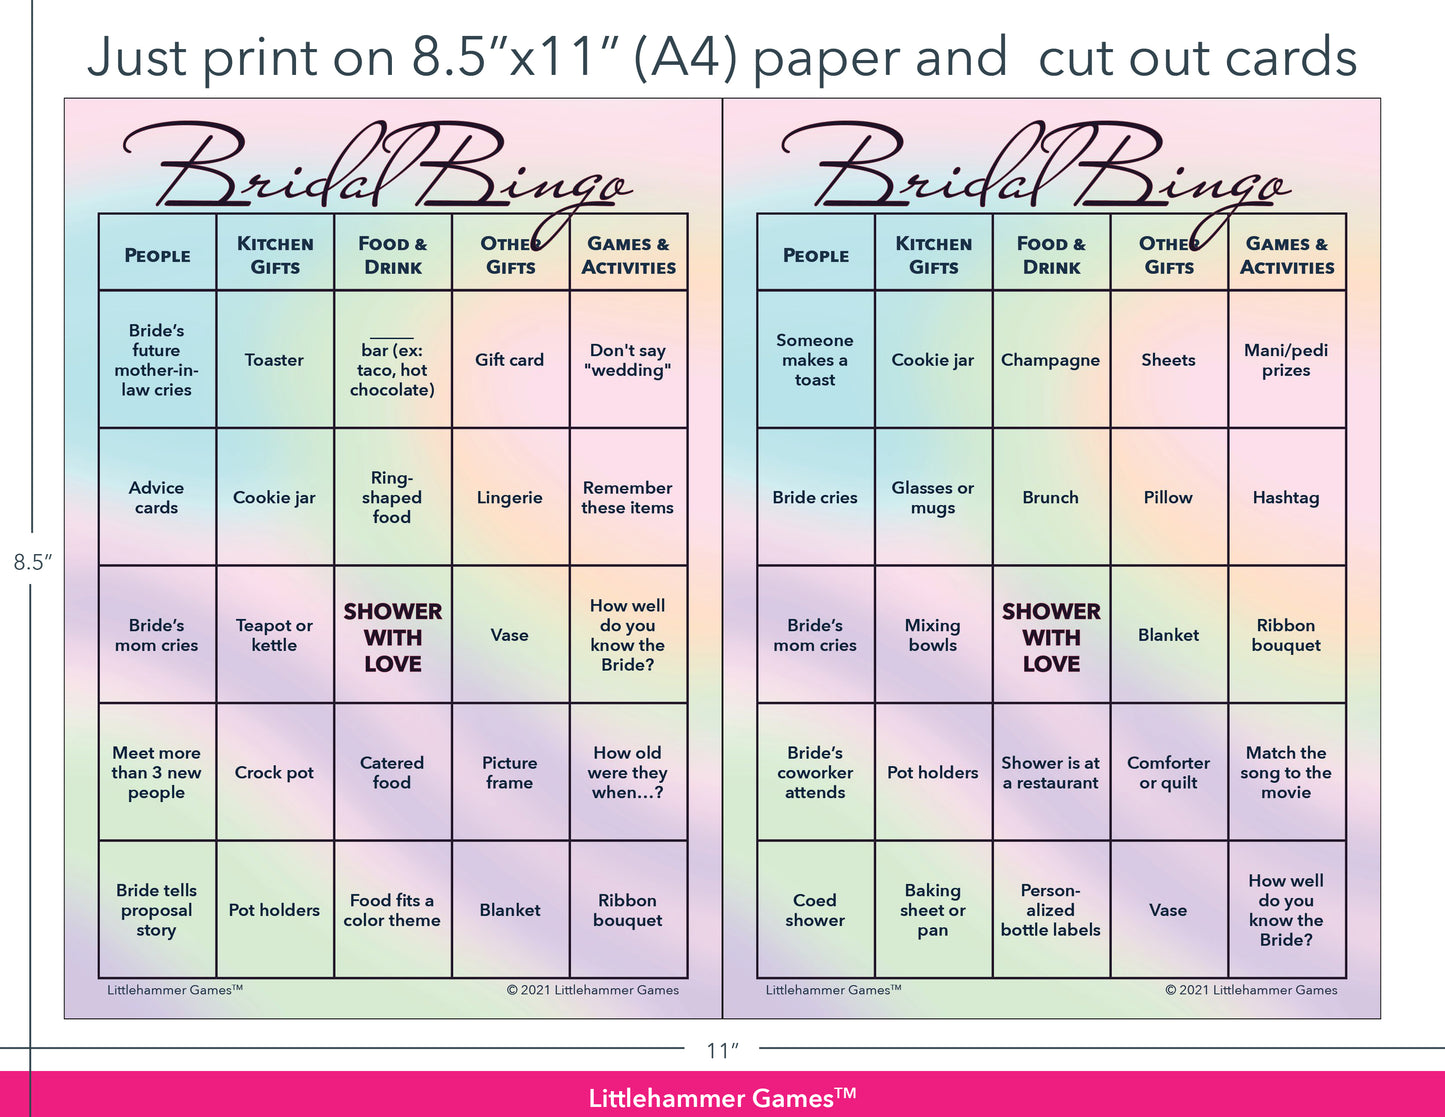 Hologram-themed Bridal Bingo game cards with printing instructions